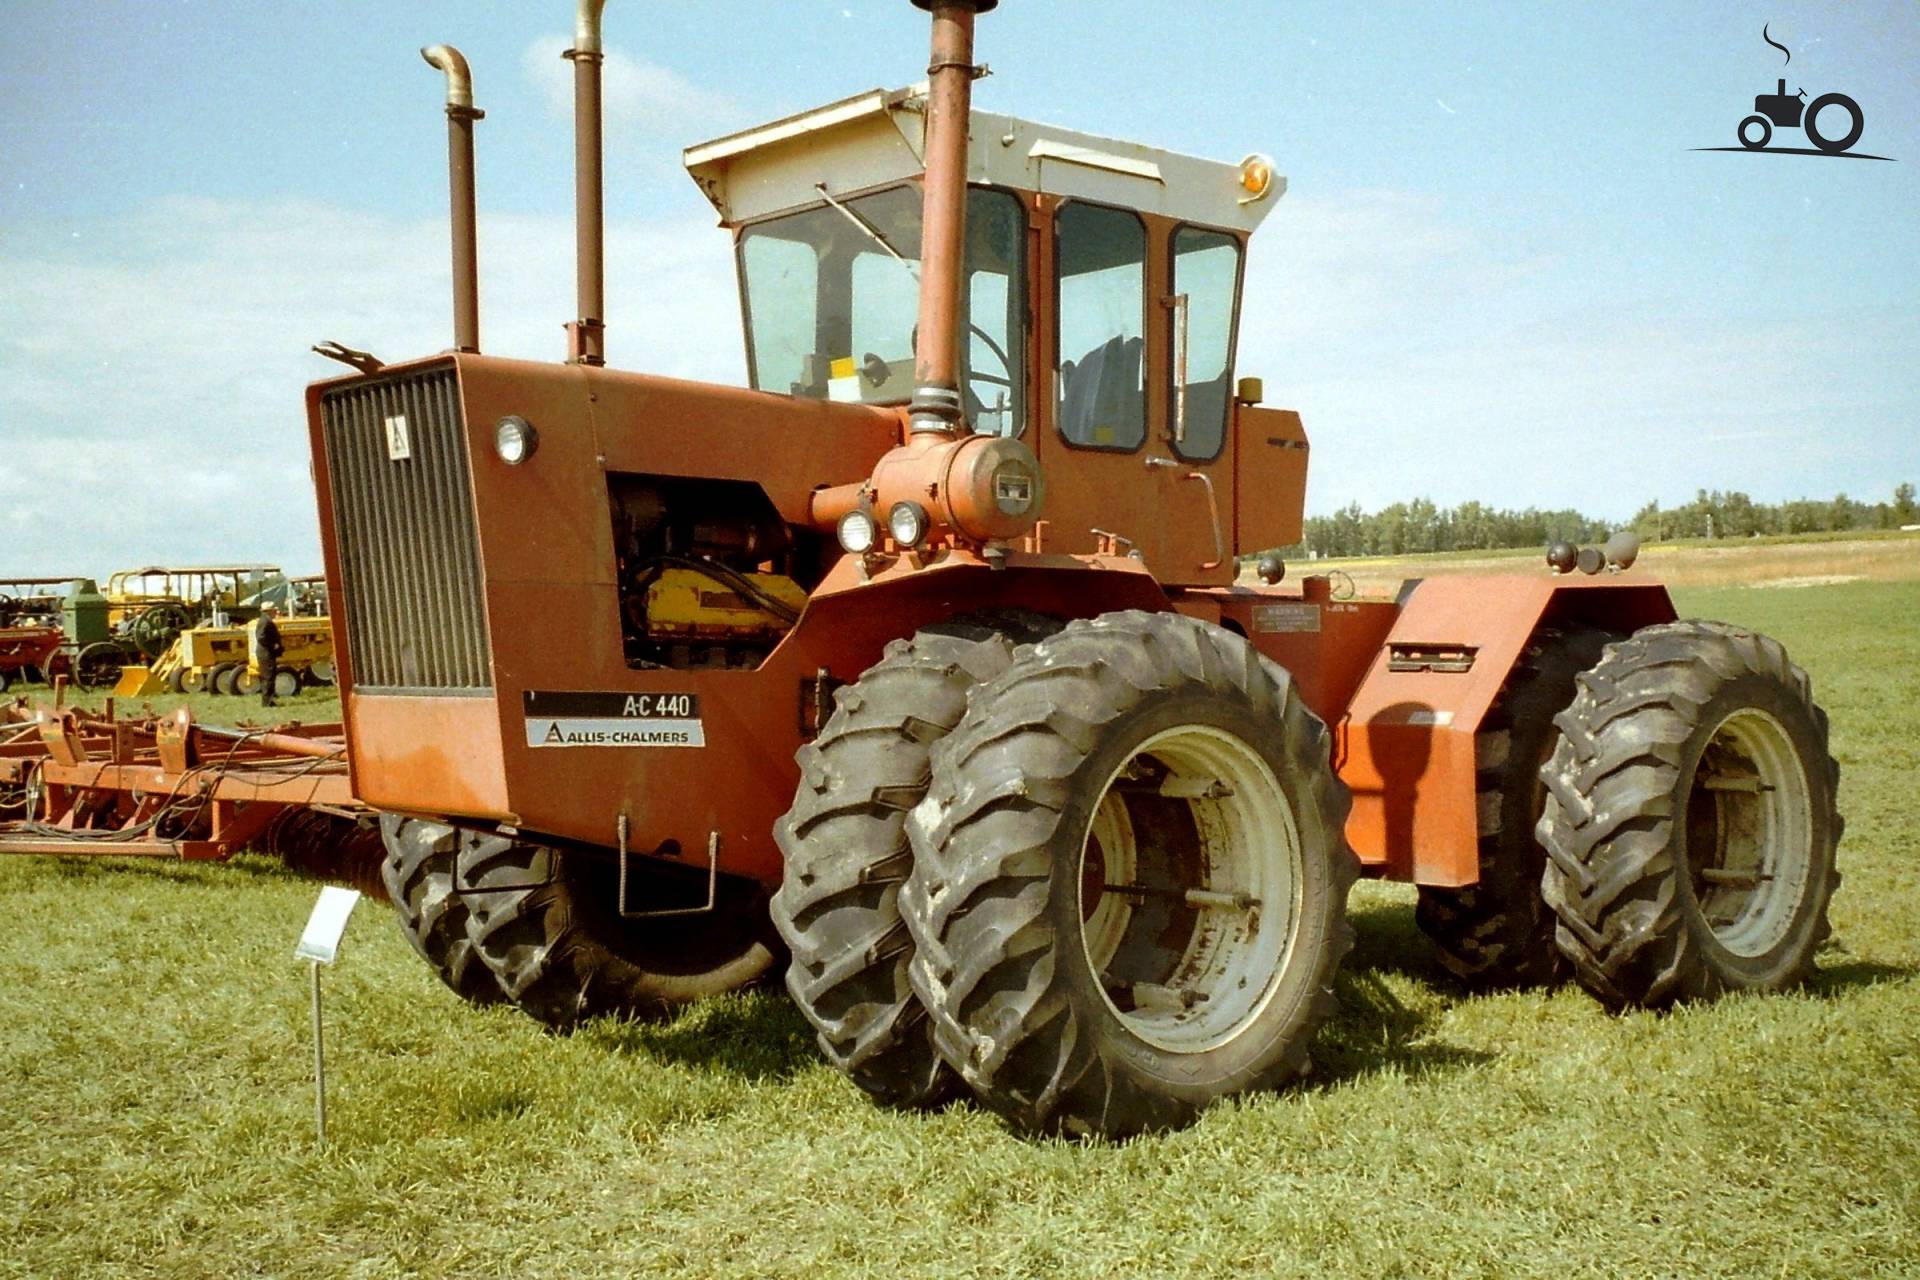 ... Chalmers 440 Specs and data - Everything about the Allis-Chalmers 440